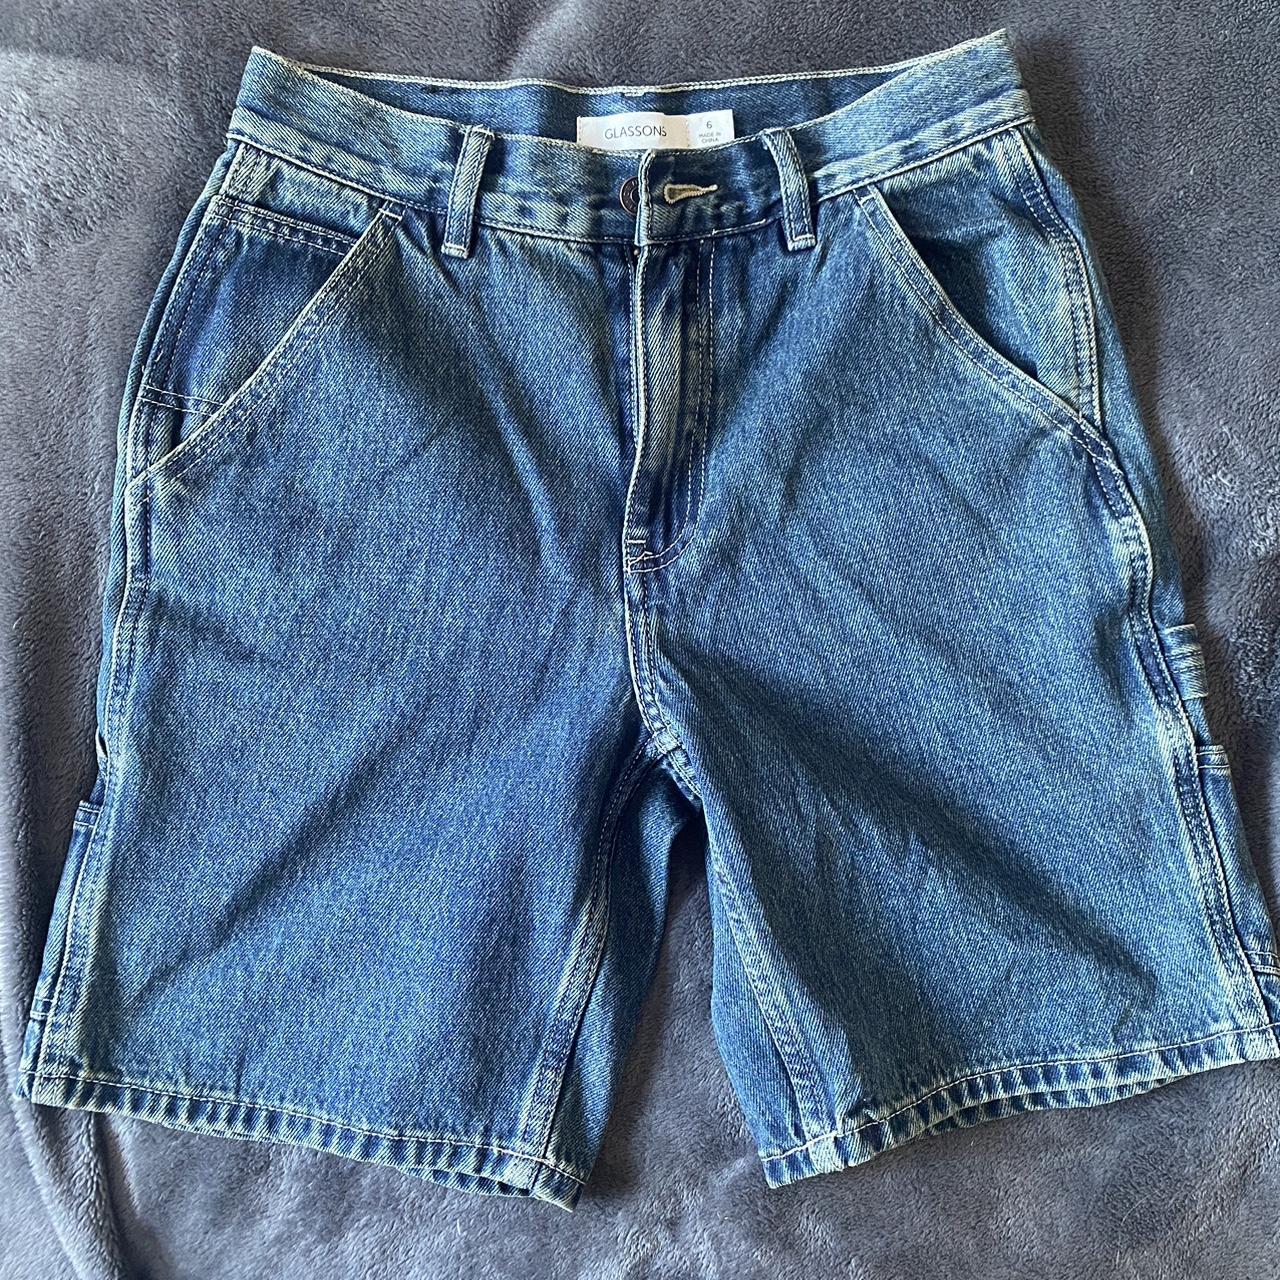 DO NOT PURCHASE on hold :> Glassons jorts size 6... - Depop